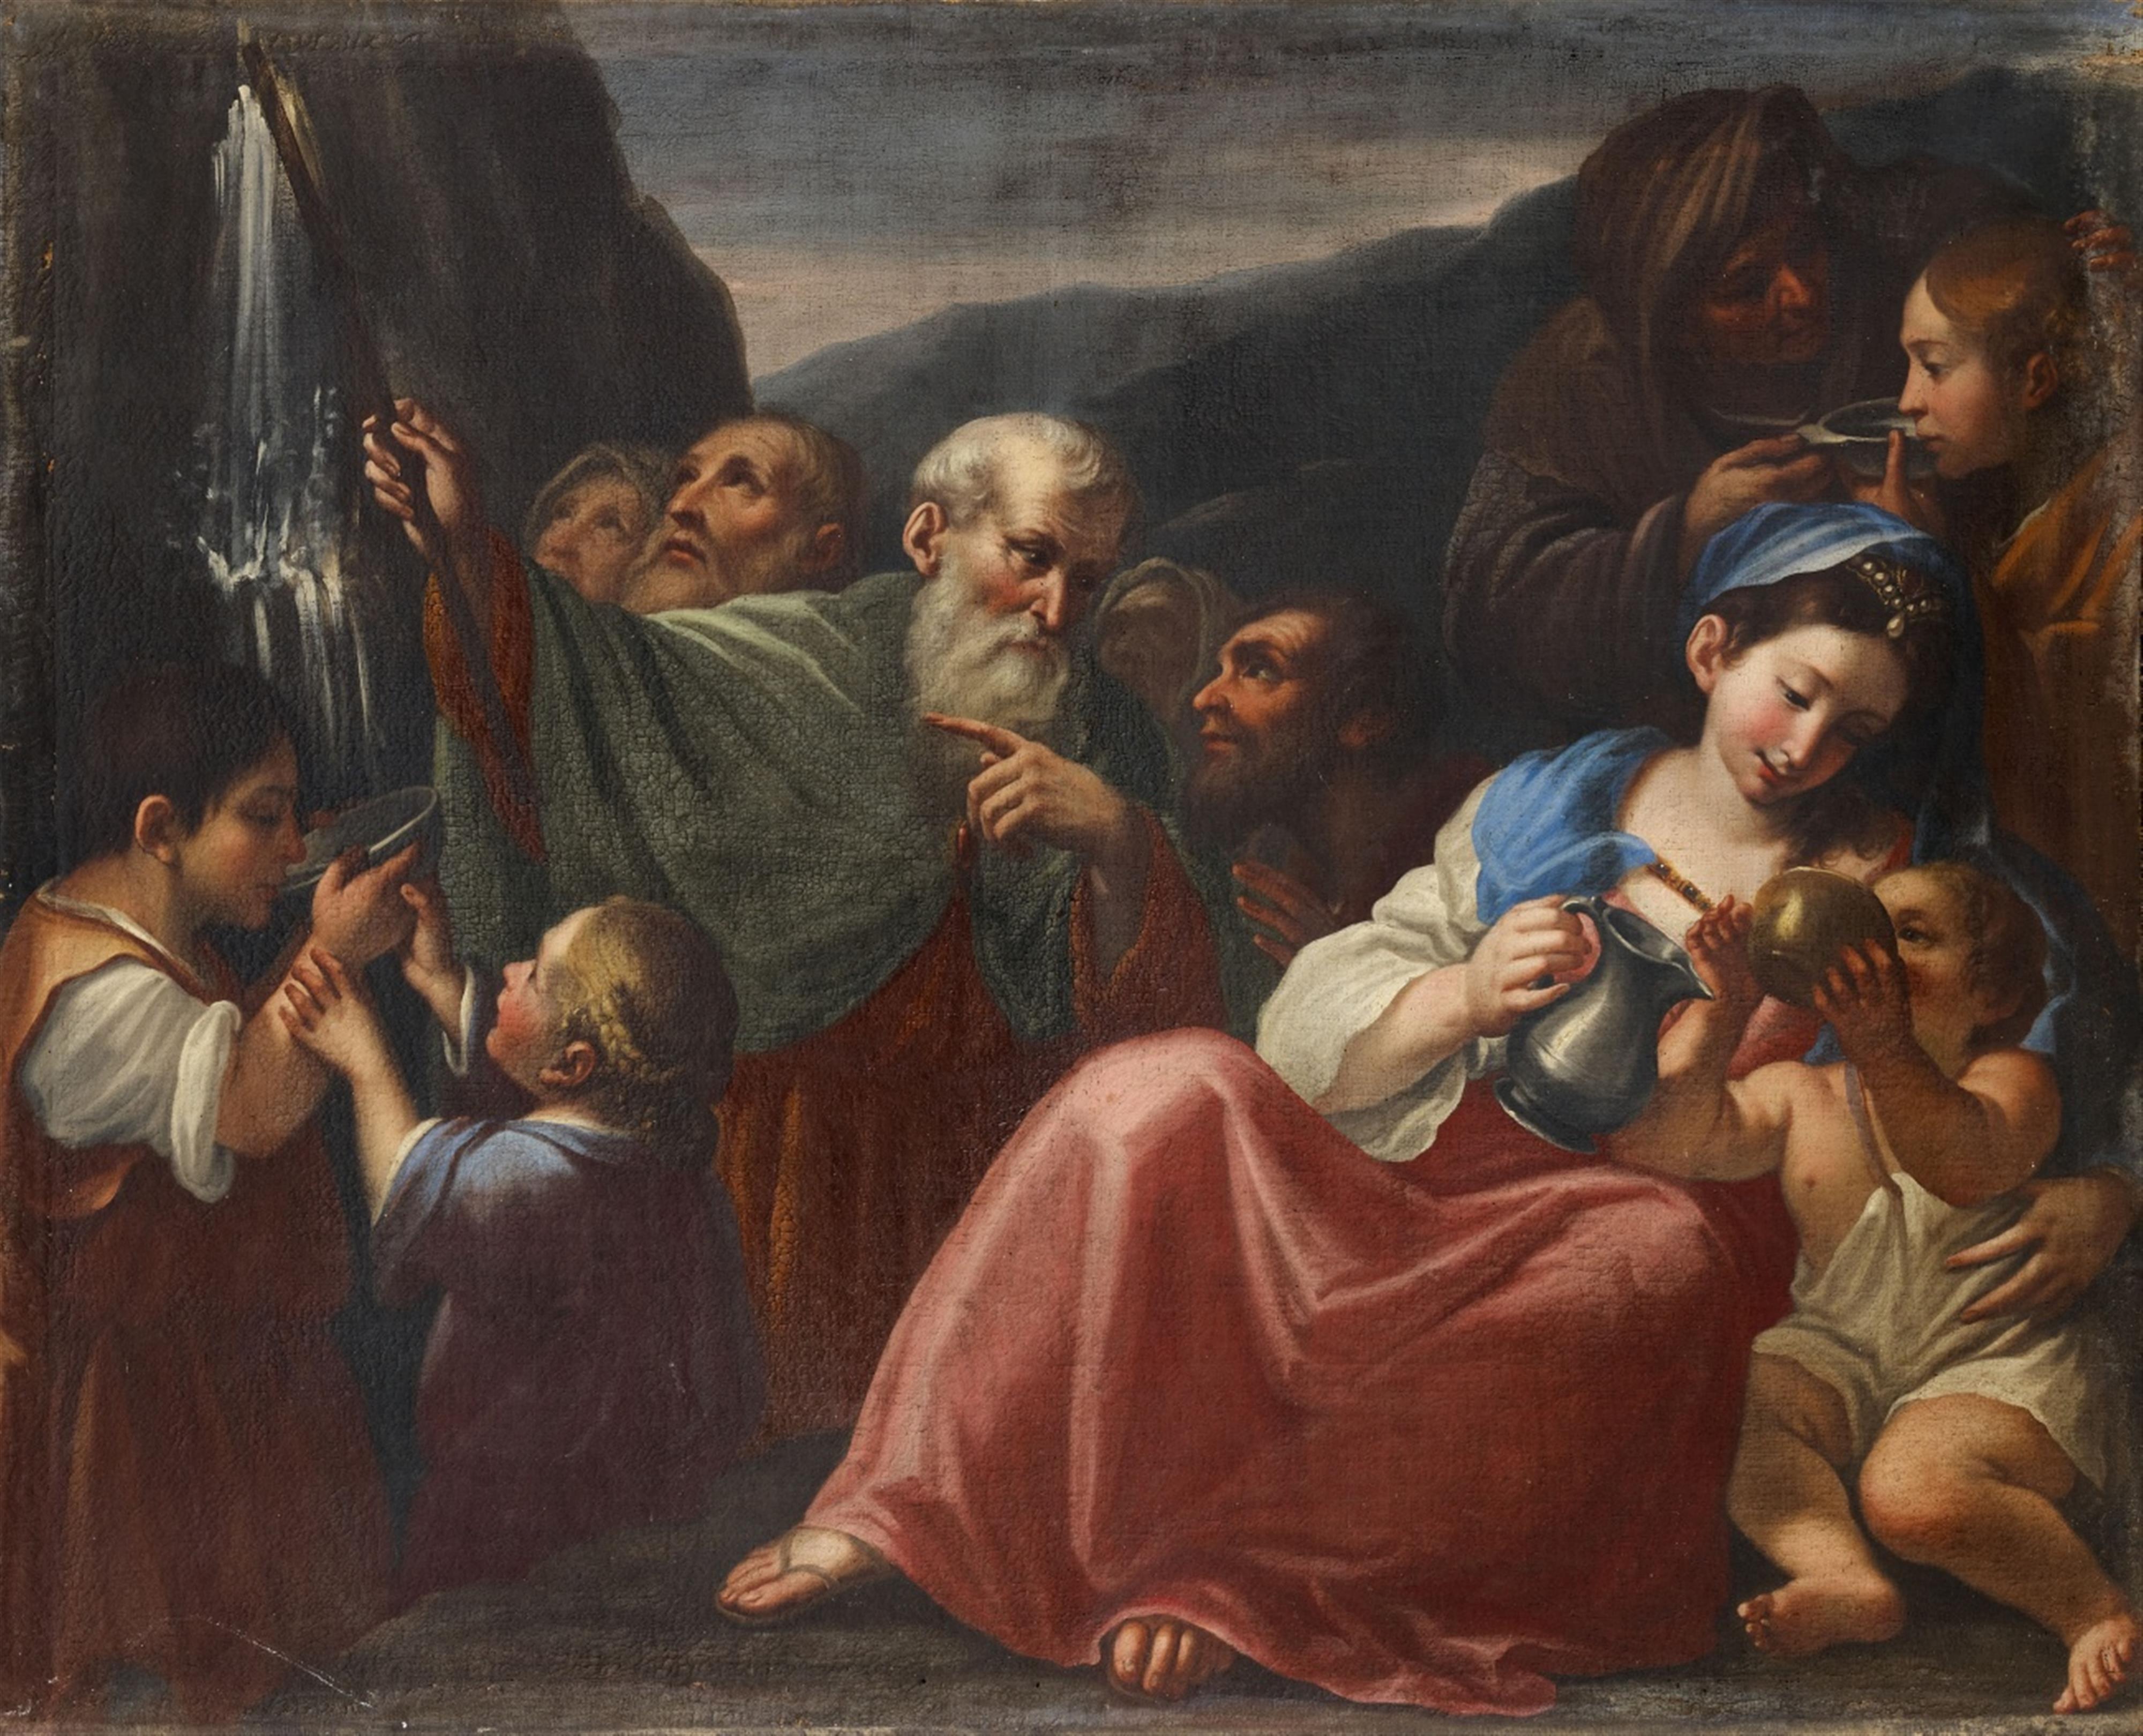 Lombardian School 17th century - The Discovery of the Infant Moses The Test of Fire of Moses The Israelites Collecting their Jewellery Moses Striking the Rock - image-4